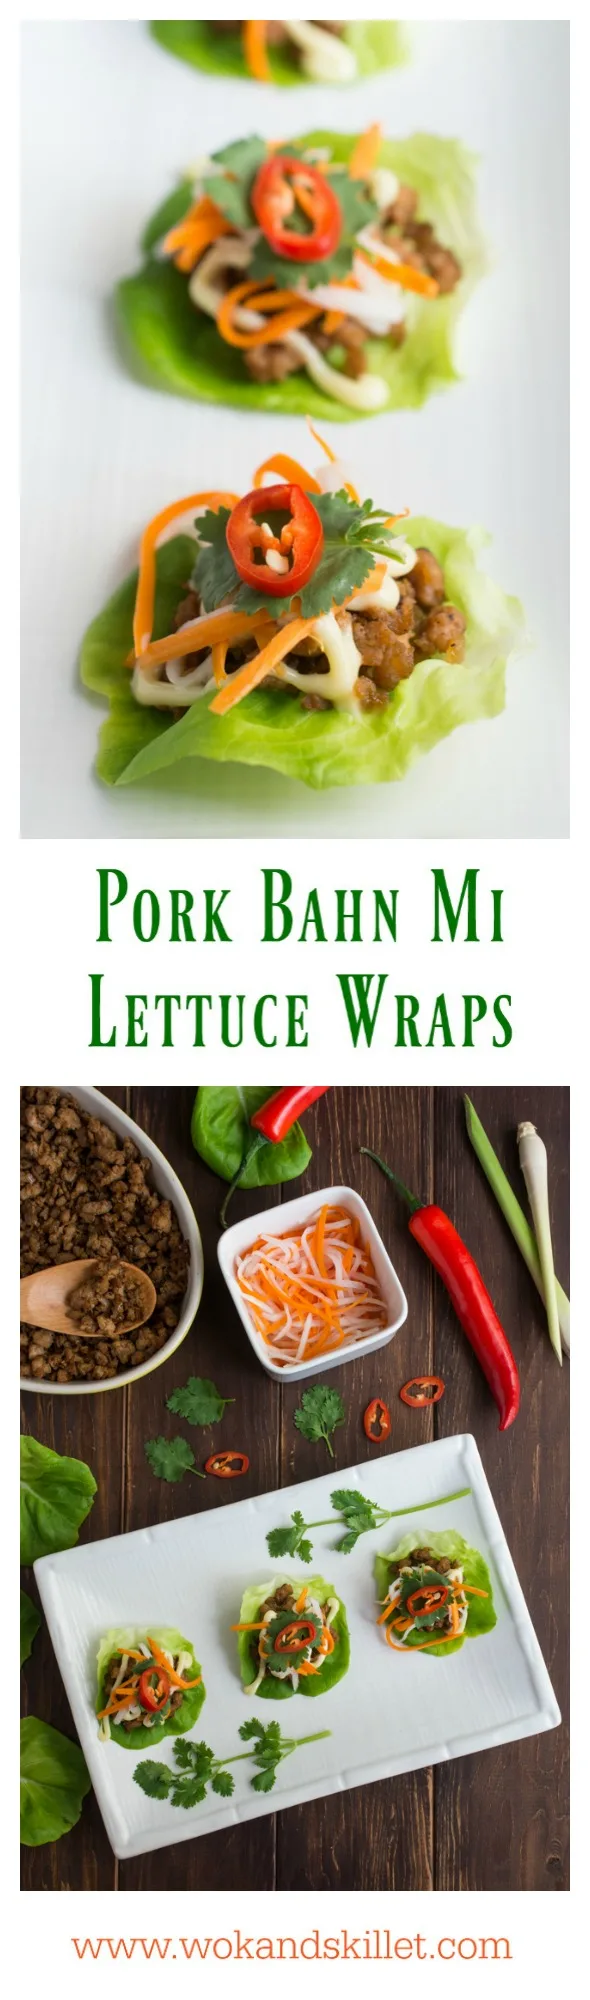 Inspired by Vietnamese Lemongrass Pork Bahn Mi Sandwiches, these Pork Bahn Mi Lettuce Wraps feature a lemongrass pork filling topped with creamy mayonnaise, pickled carrots and daikon, then topped with cilantro and fresh chili. 